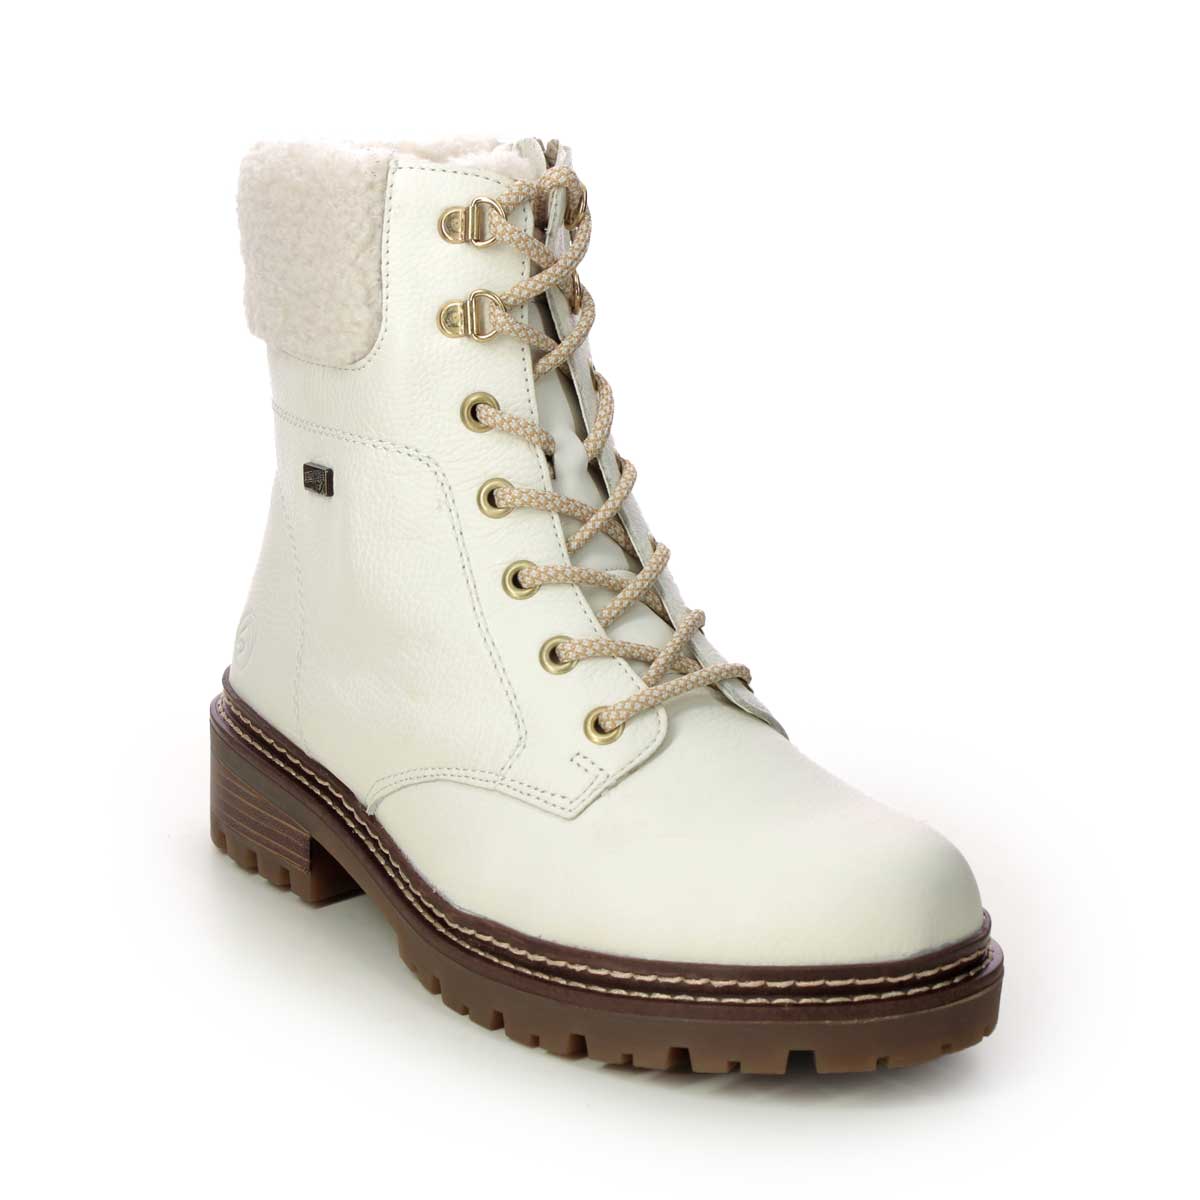 Remonte D0B74-81 Astra Teddy Tex WHITE LEATHER Womens Winter Boots in a Plain Leather in Size 38